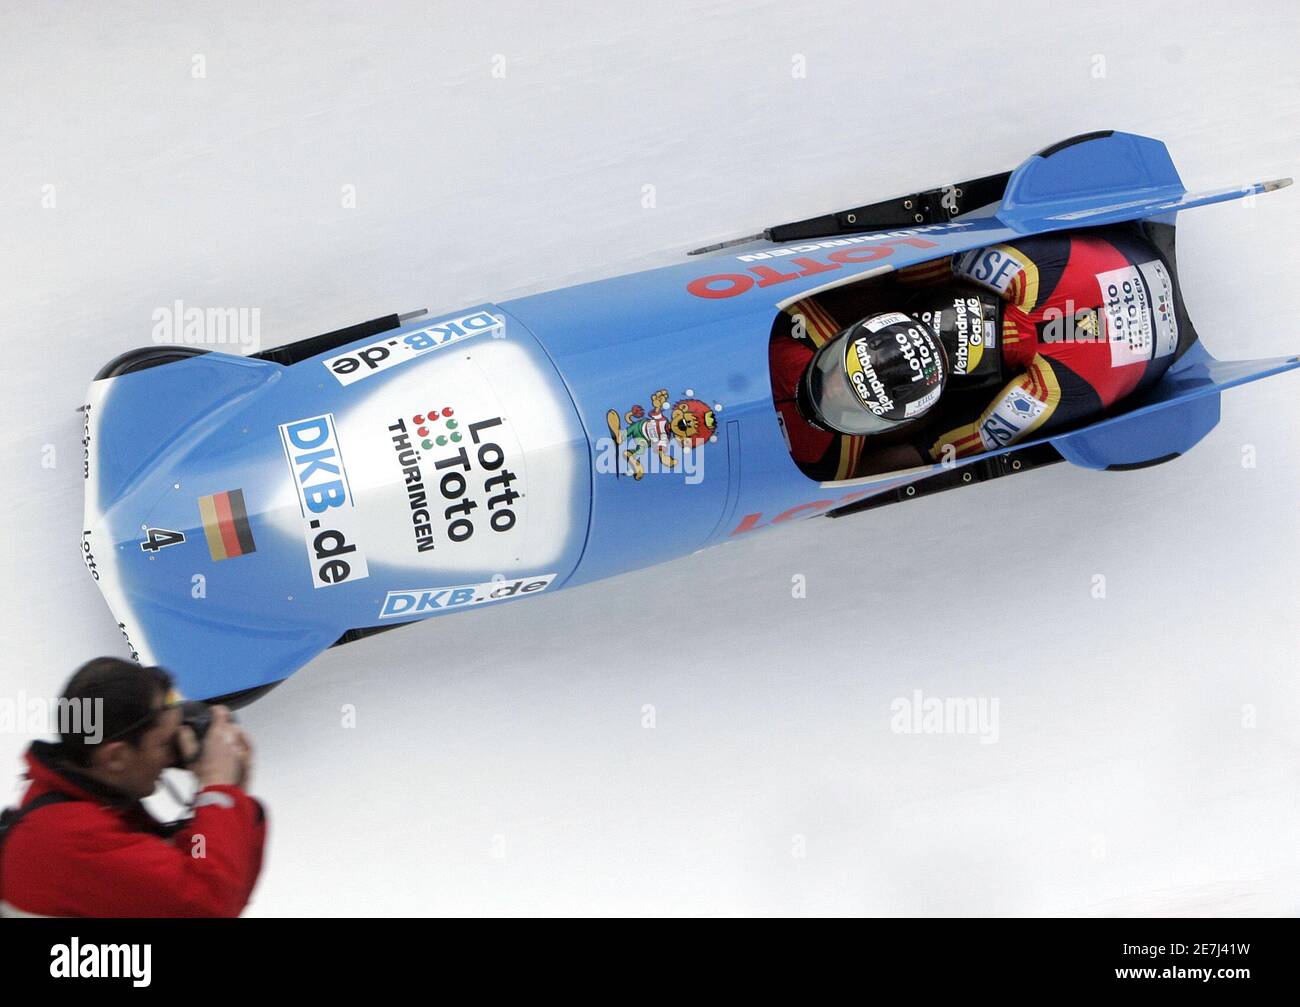 Germany three with pilot Andre Lange (L) and brakeman Kevin Kuske (R) speeds down in their bobsleigh during their first run at the FIBT Bobsleigh World Cup competition at the Olympia Bob Run in St Moritz, Switzerland, January 21, 2006. Germany three won the competition ahead of Switzerland two and third placed Switzerland three. REUTERS/Andreas MeierREUTERS/Andreas Meier Stock Photo